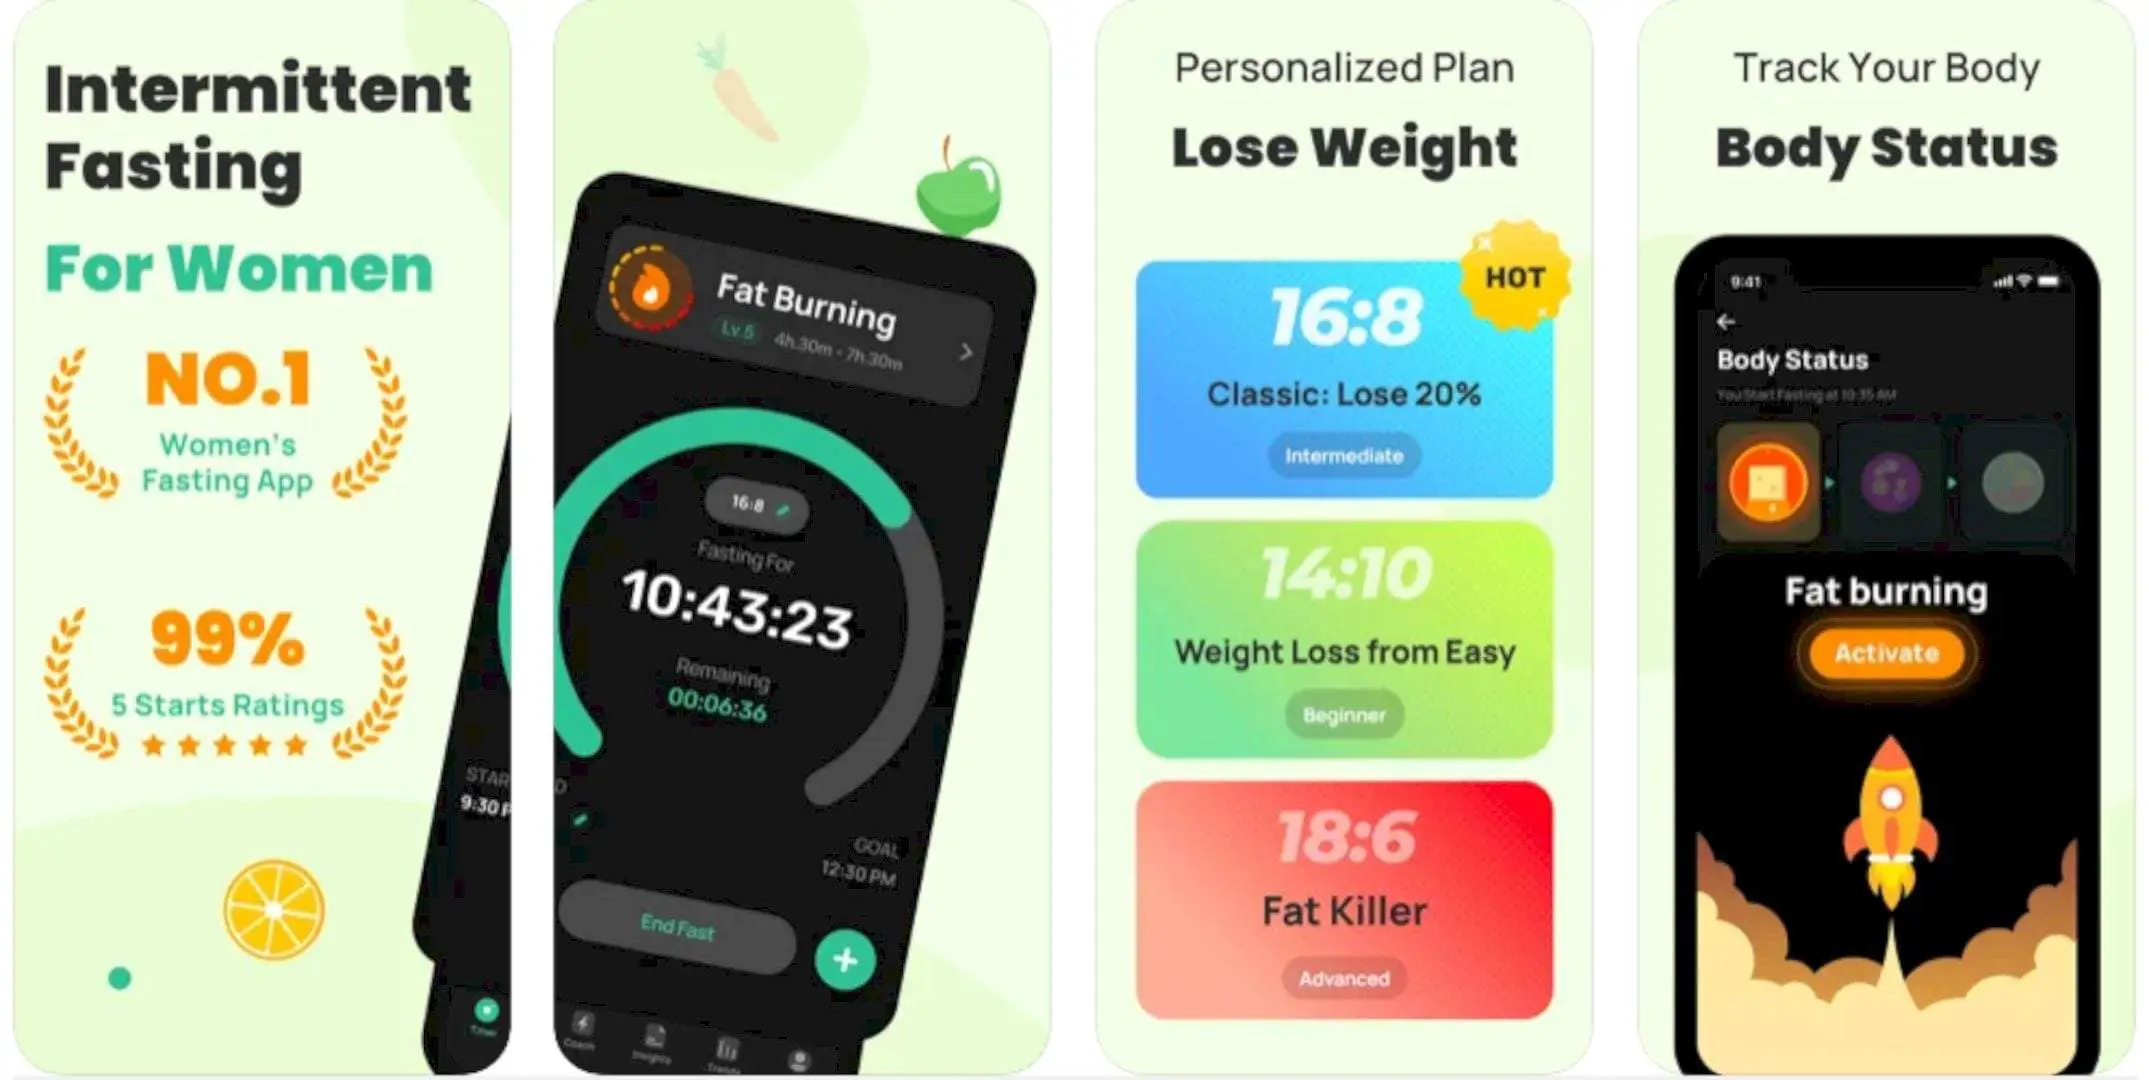 11 Best iOS Apps for Intermittent Fasting